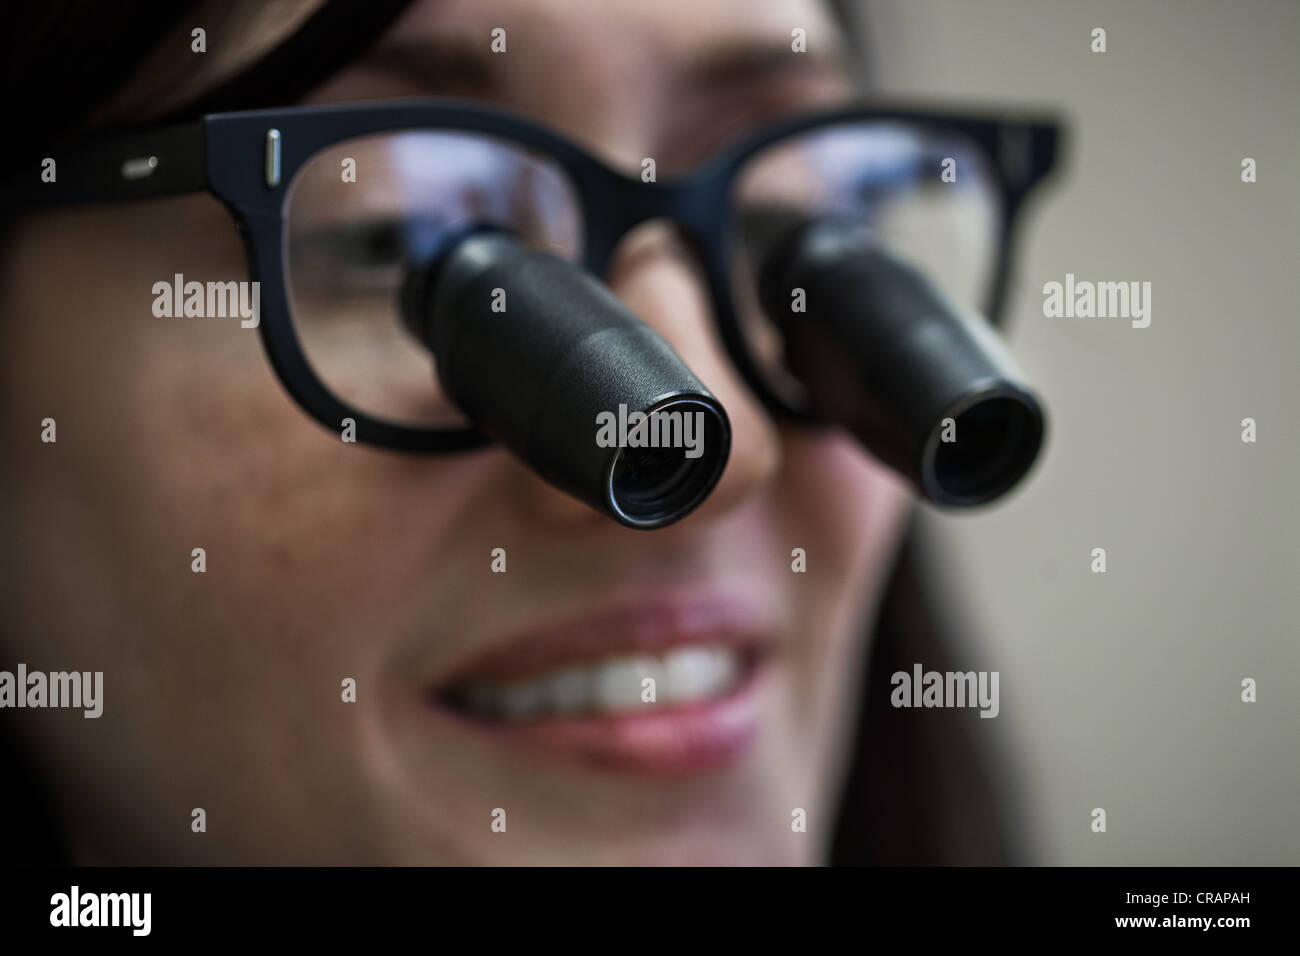 An eye doctor examines a patient. Stock Photo